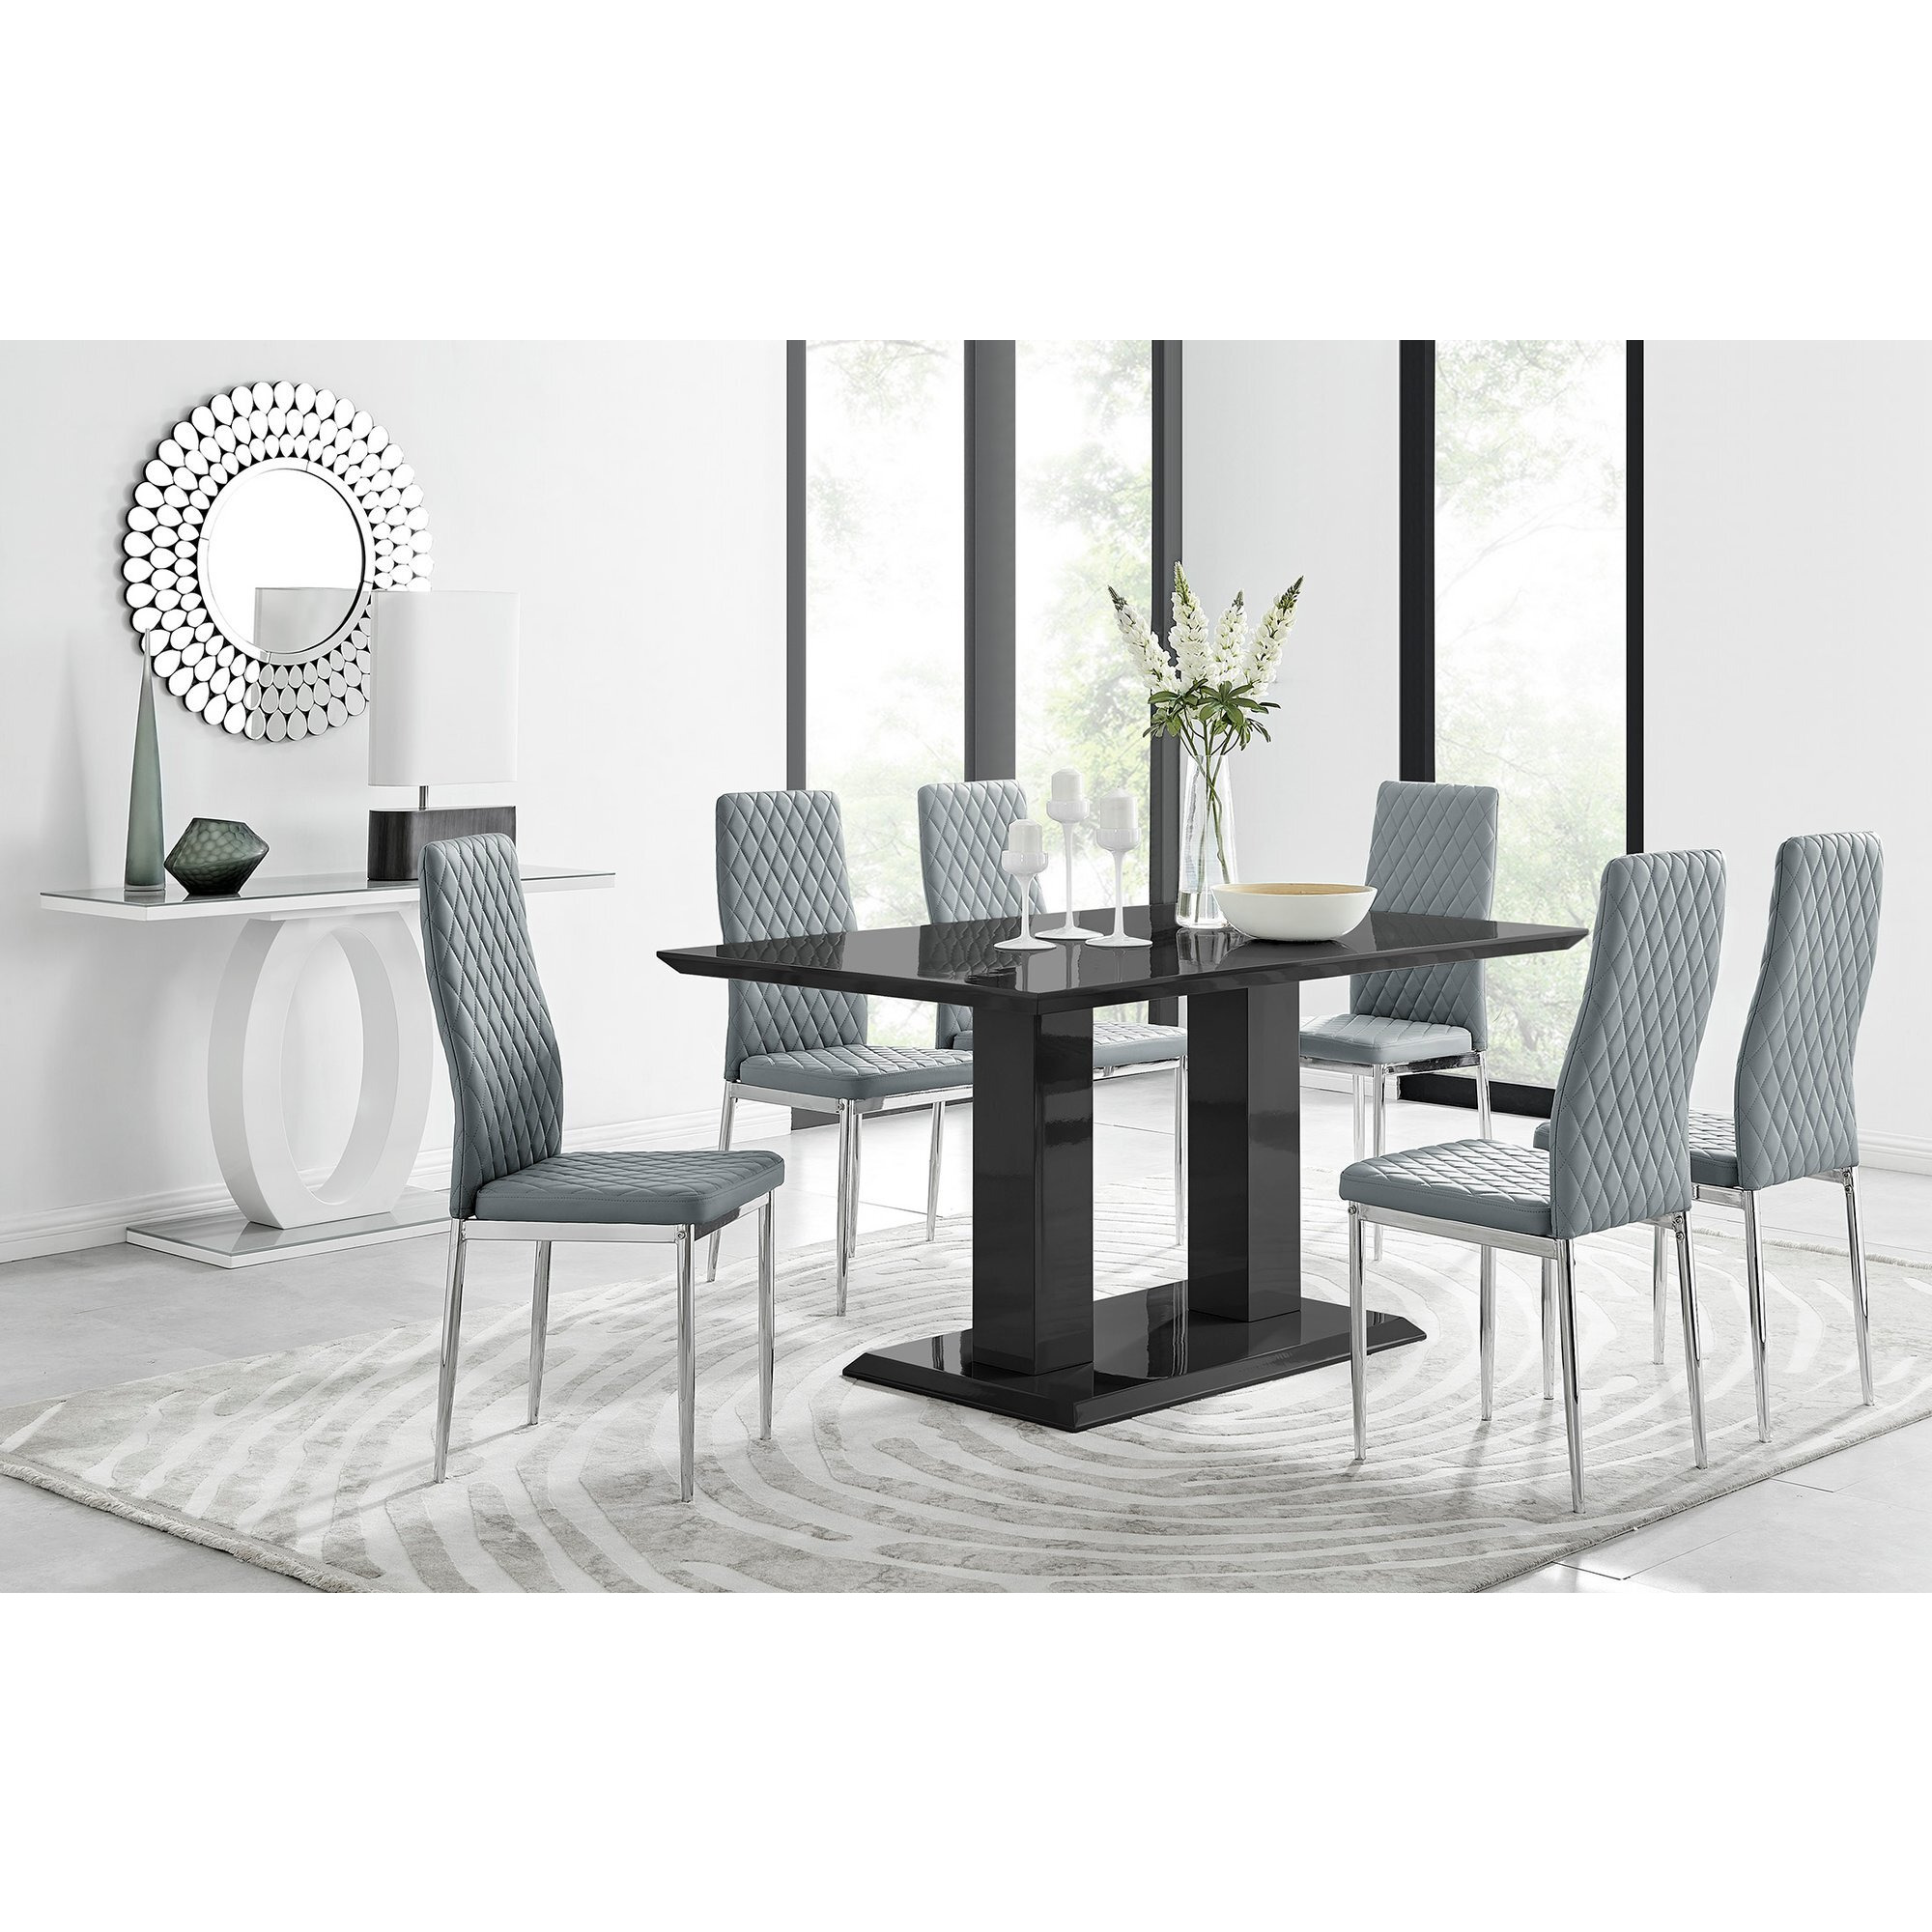 Imperia Black High Gloss Dining Table And 6 Milan Dining Chairs Set